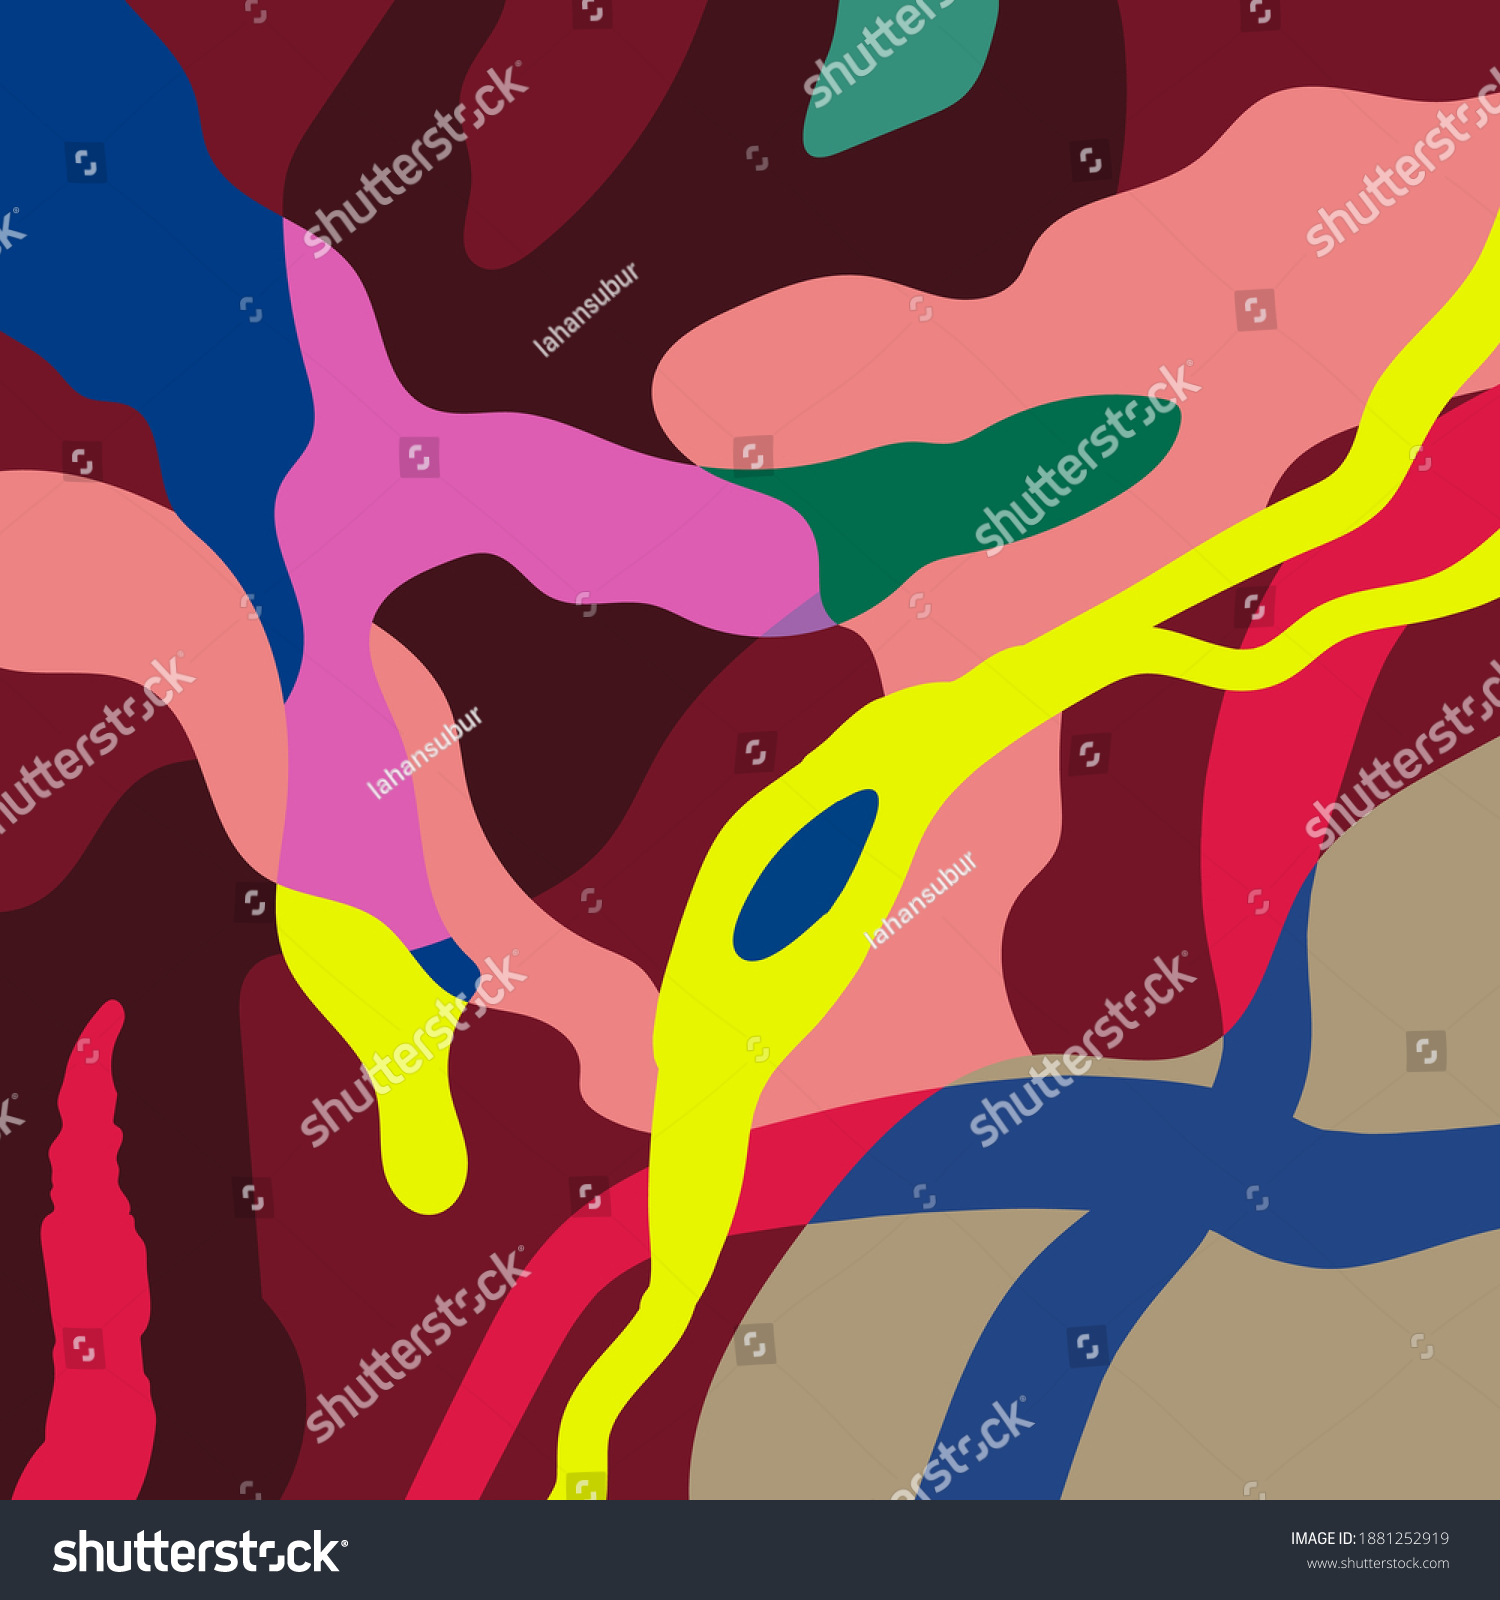 Colors Backgrounds Painting Art Vector Stock Vector (Royalty Free ...